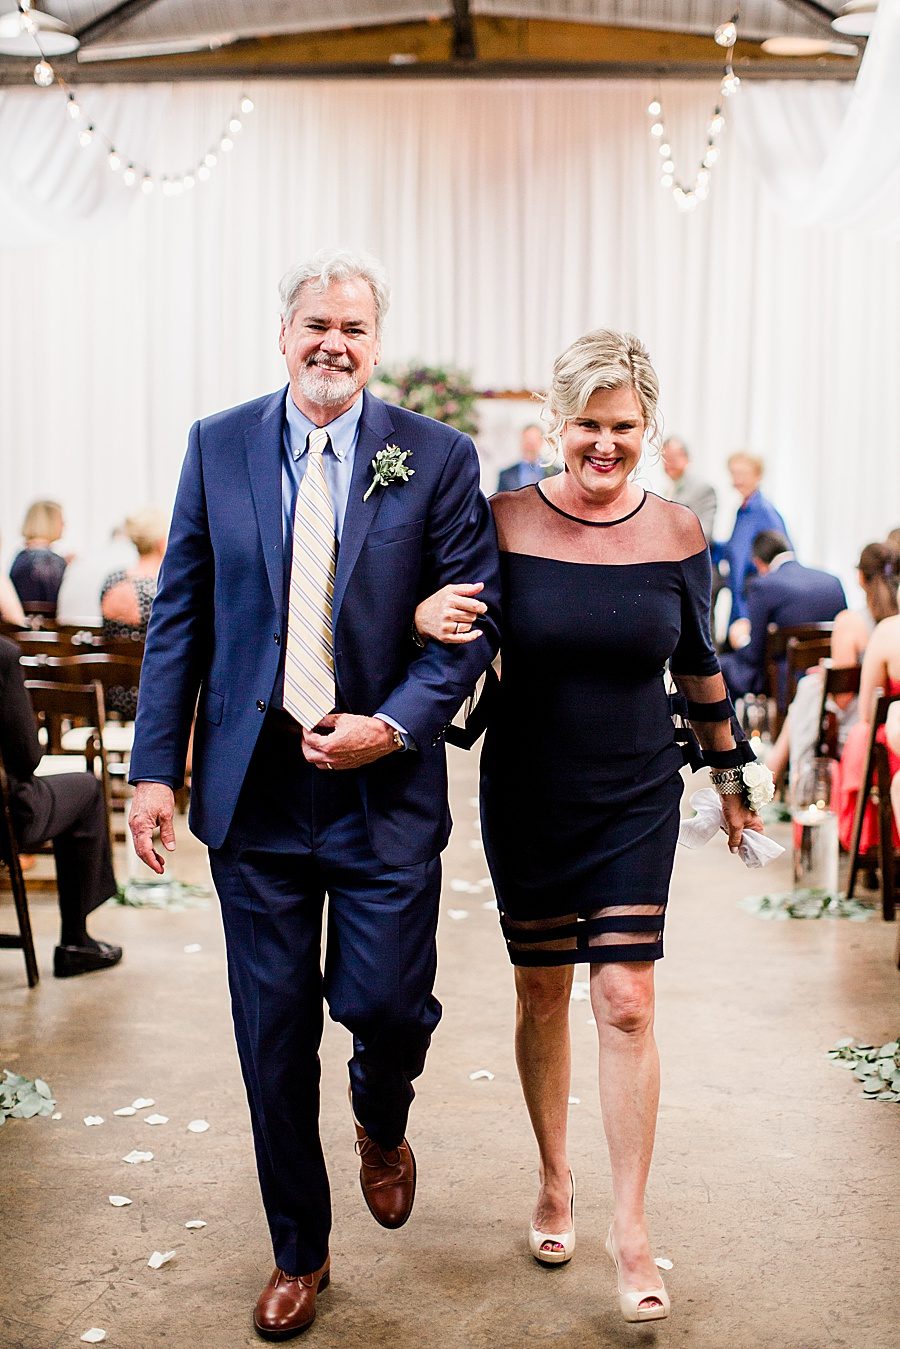 Parents of the groom at this Wedding at The Standard by Knoxville Wedding Photographer, Amanda May Photos.